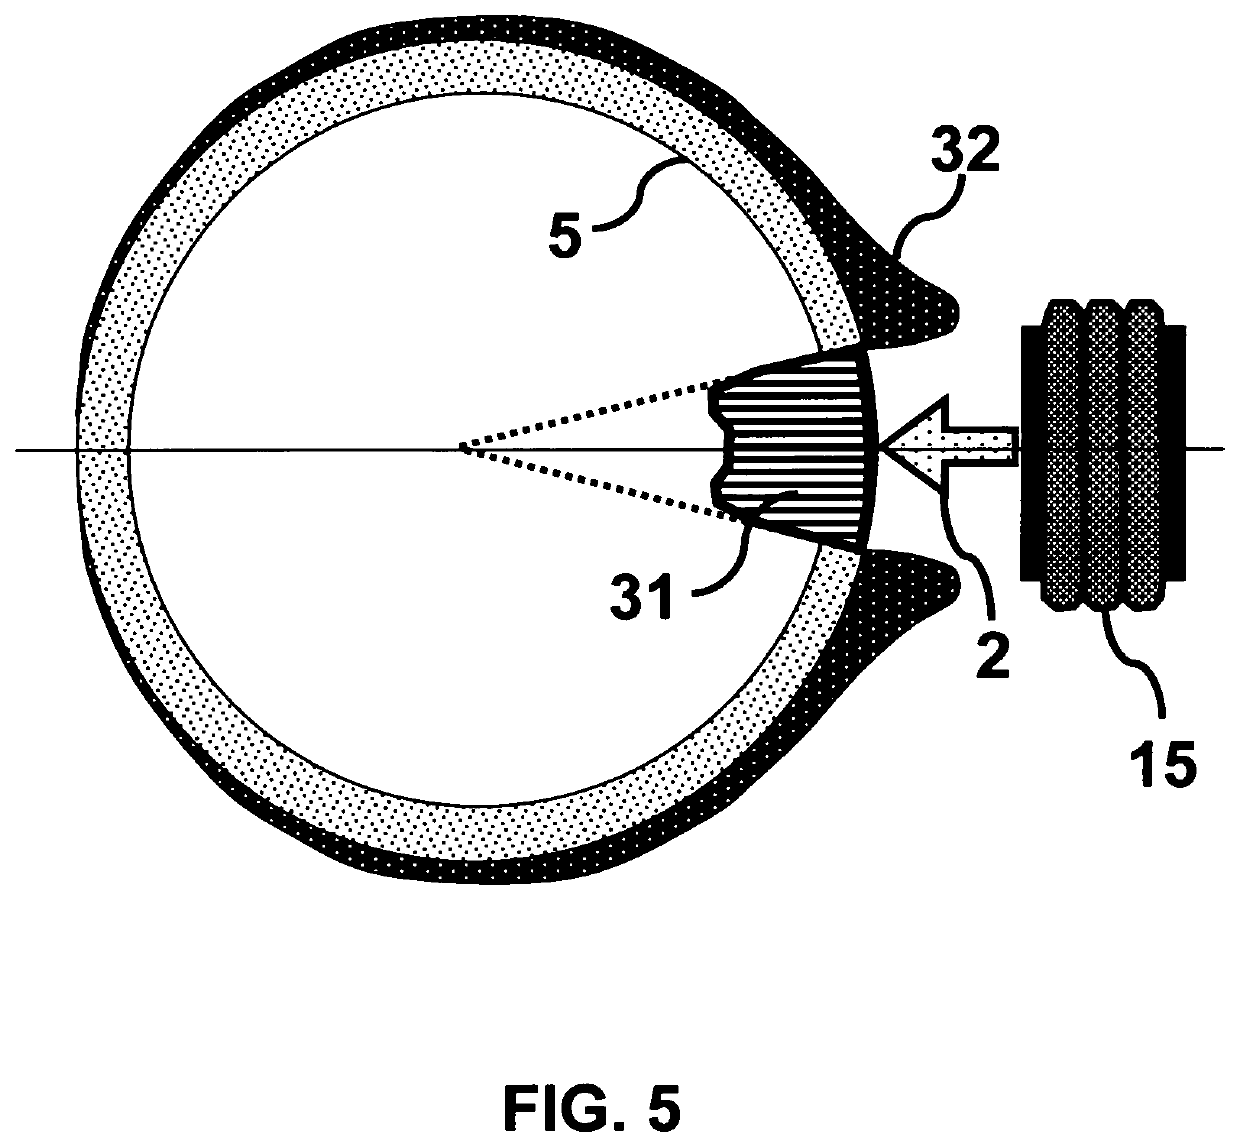 Segmented current magnetic field propulsion system